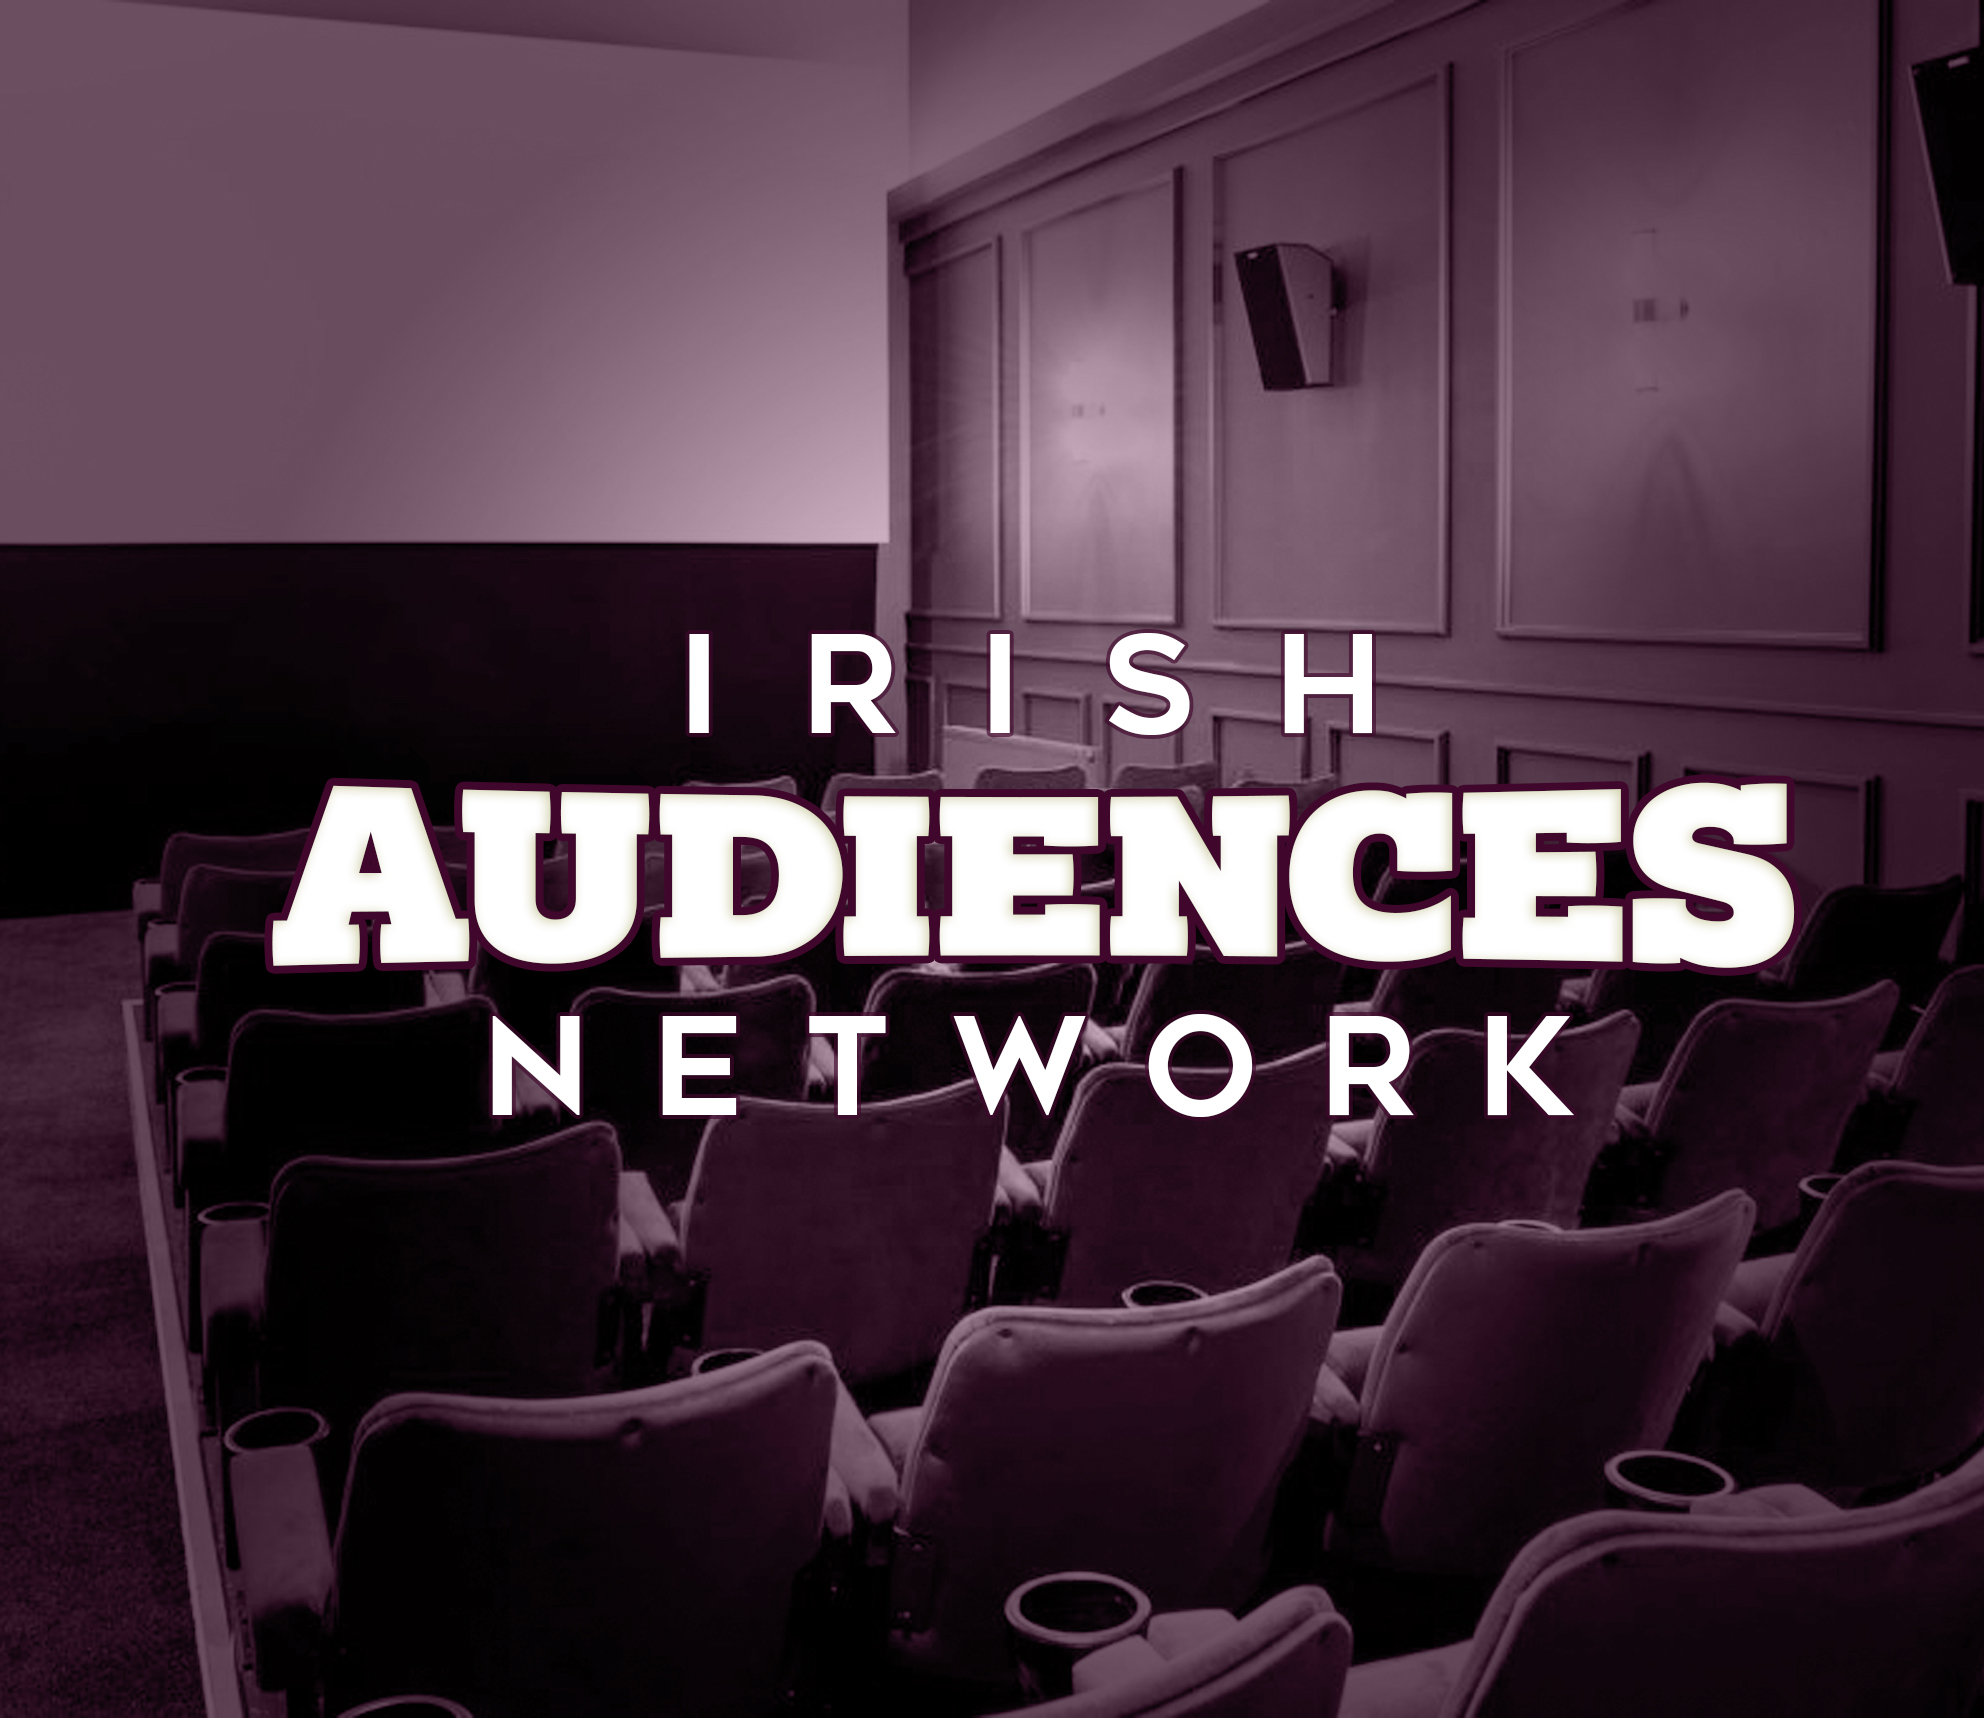 Call for papers: 2nd Symposium of the Irish Audiences Network. 5th April UCC
